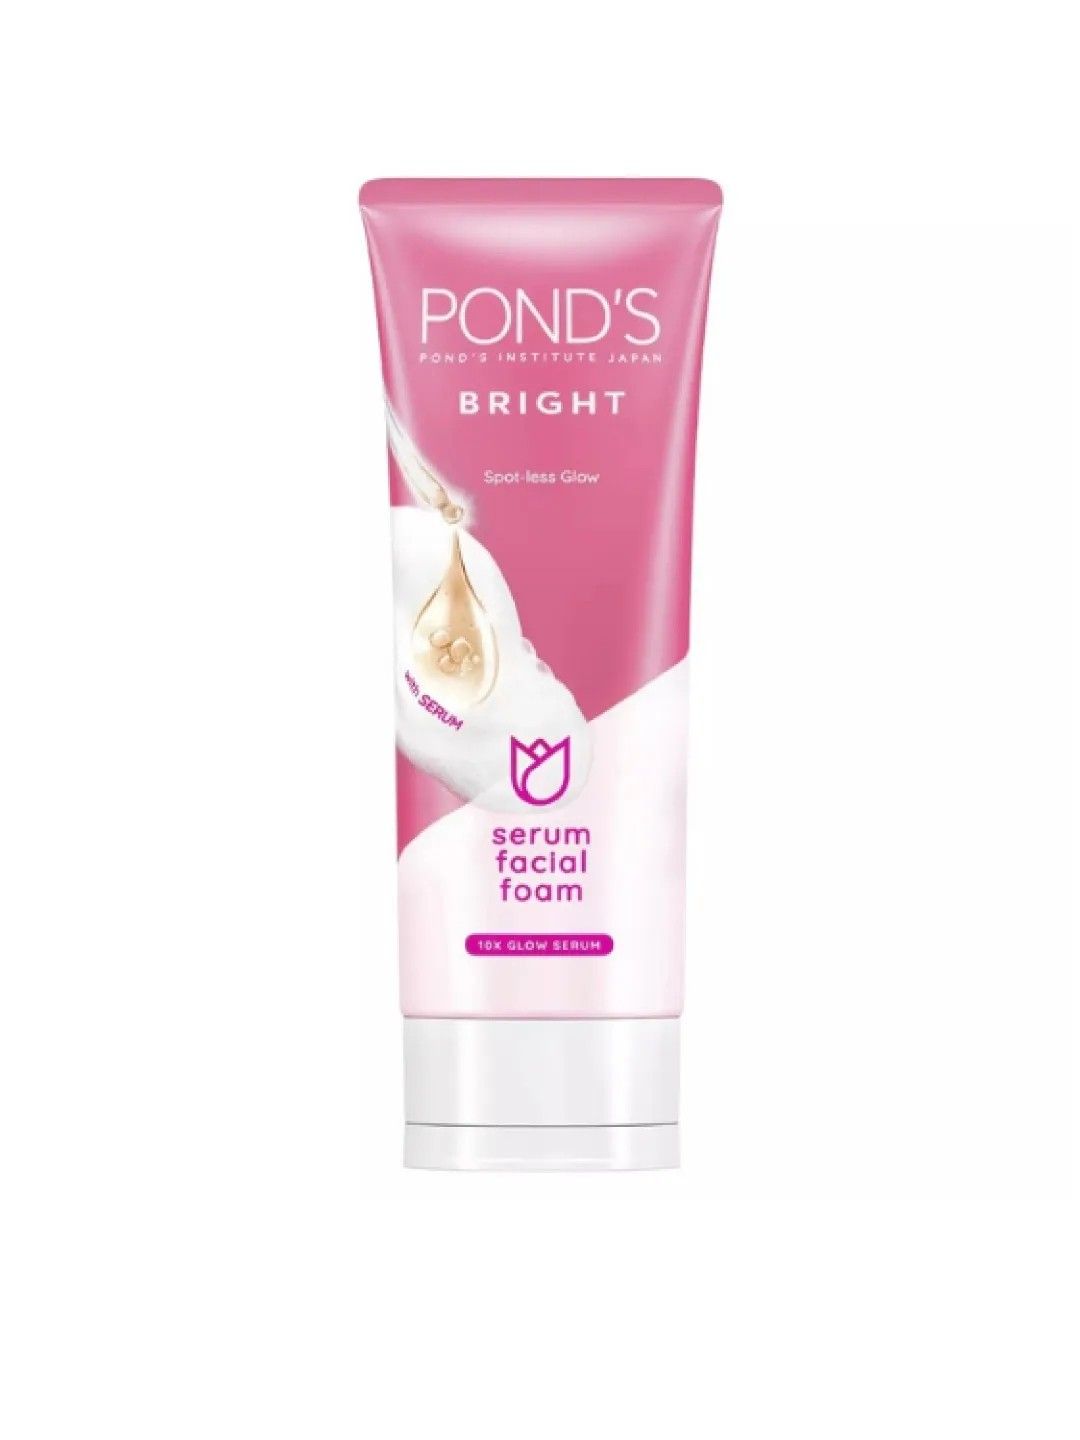 Pond's Bright Facial Foam with Niacinamide and 4D Hyaluronic Acid (100g)